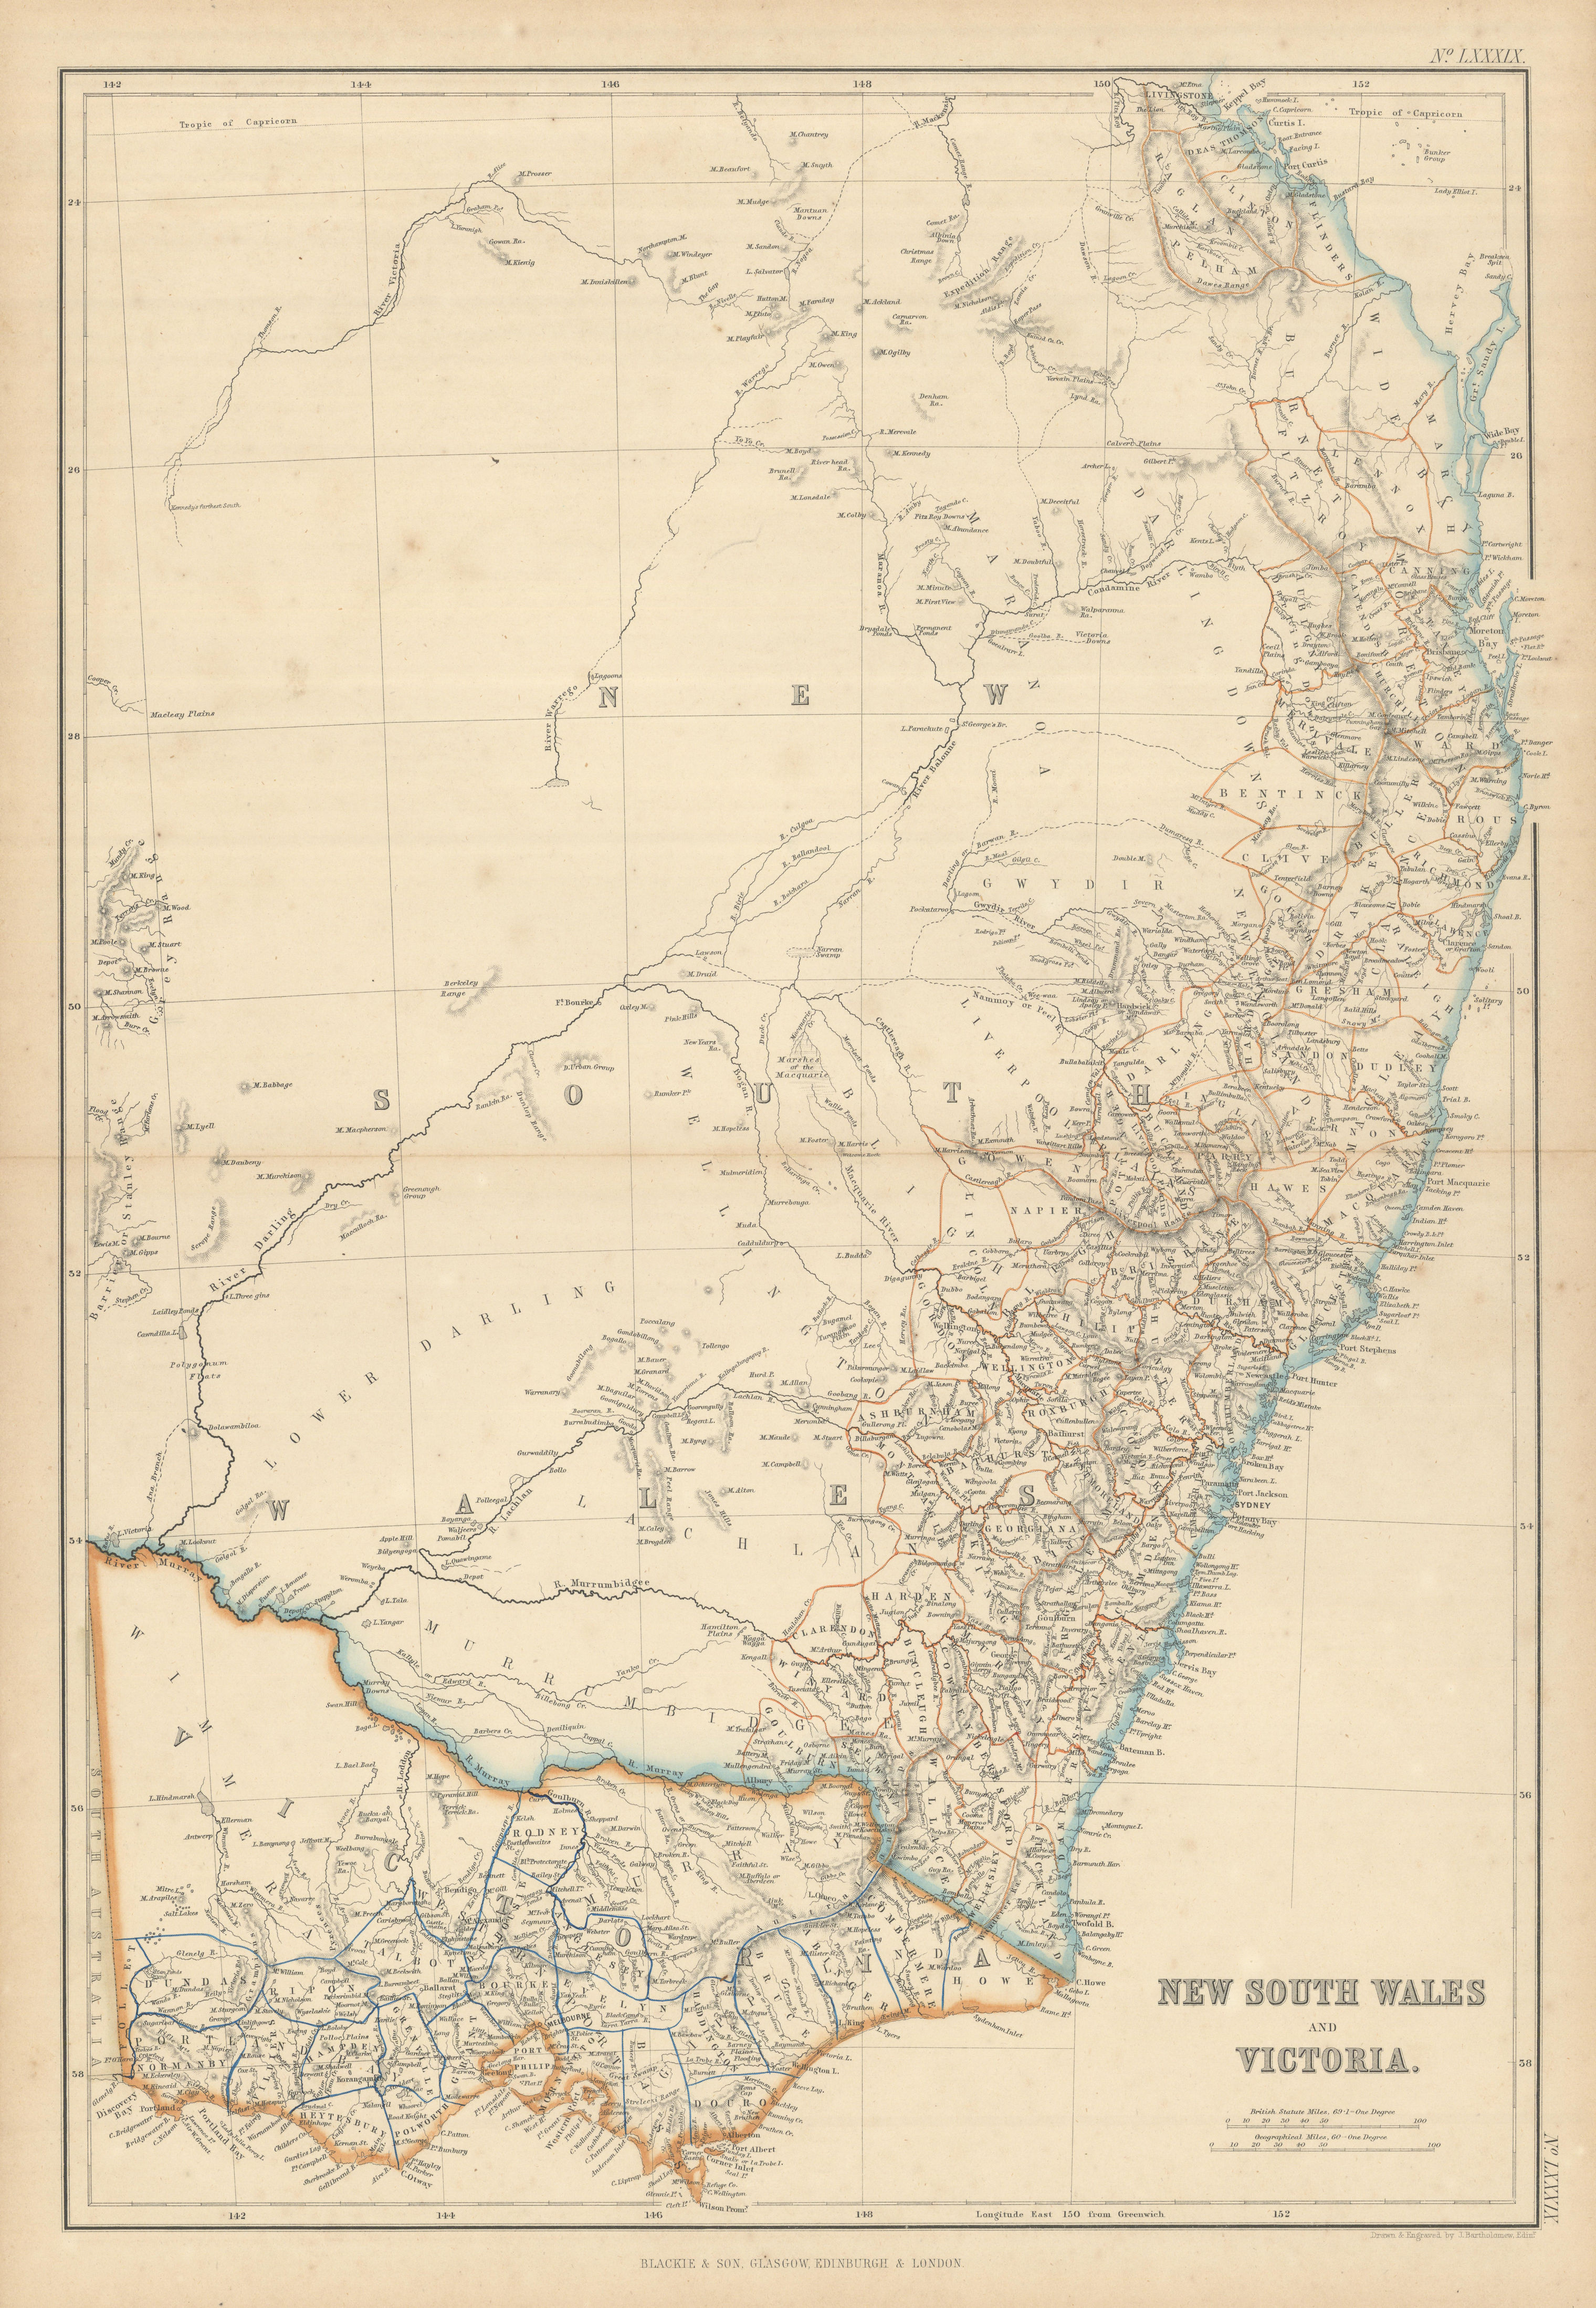 Associate Product Queen's Land, New South Wales and Victoria. Queensland. BARTHOLOMEW 1860 map